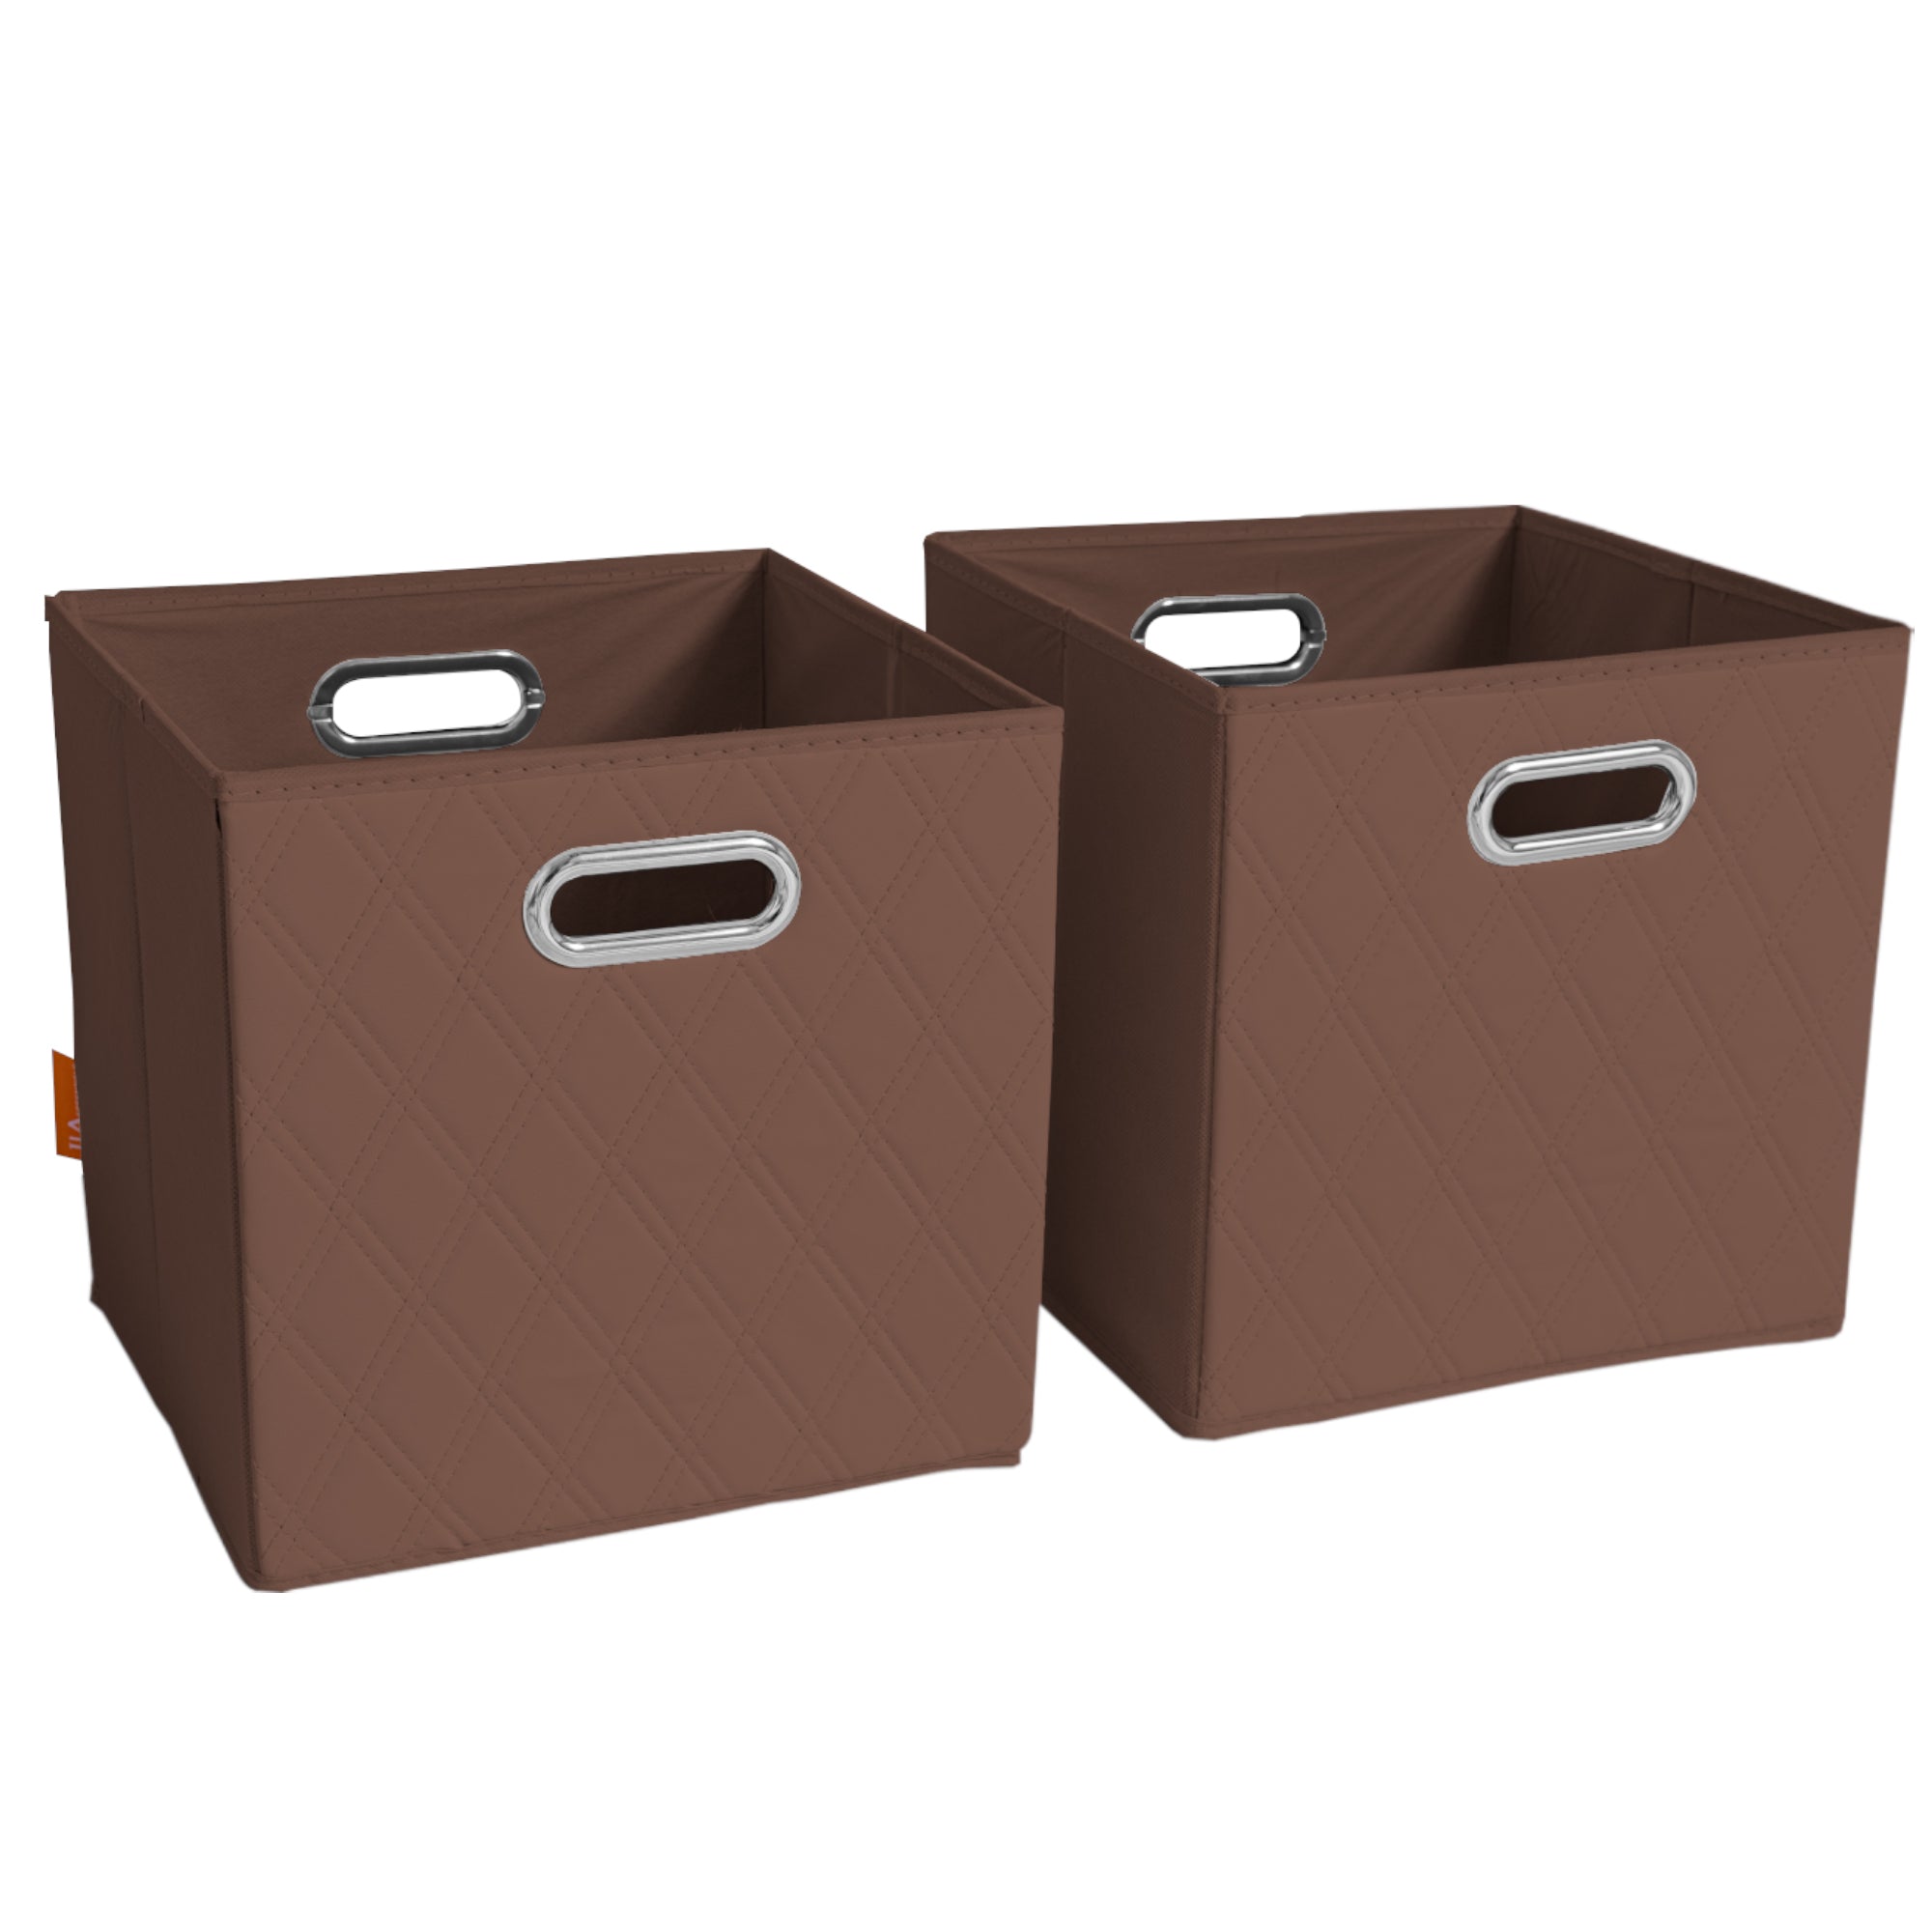 JIAessentials 12 inch Foldable Diamond Patterned Faux Leather Storage Cube Bins Set of Two with Dual Handles - 12" Brown